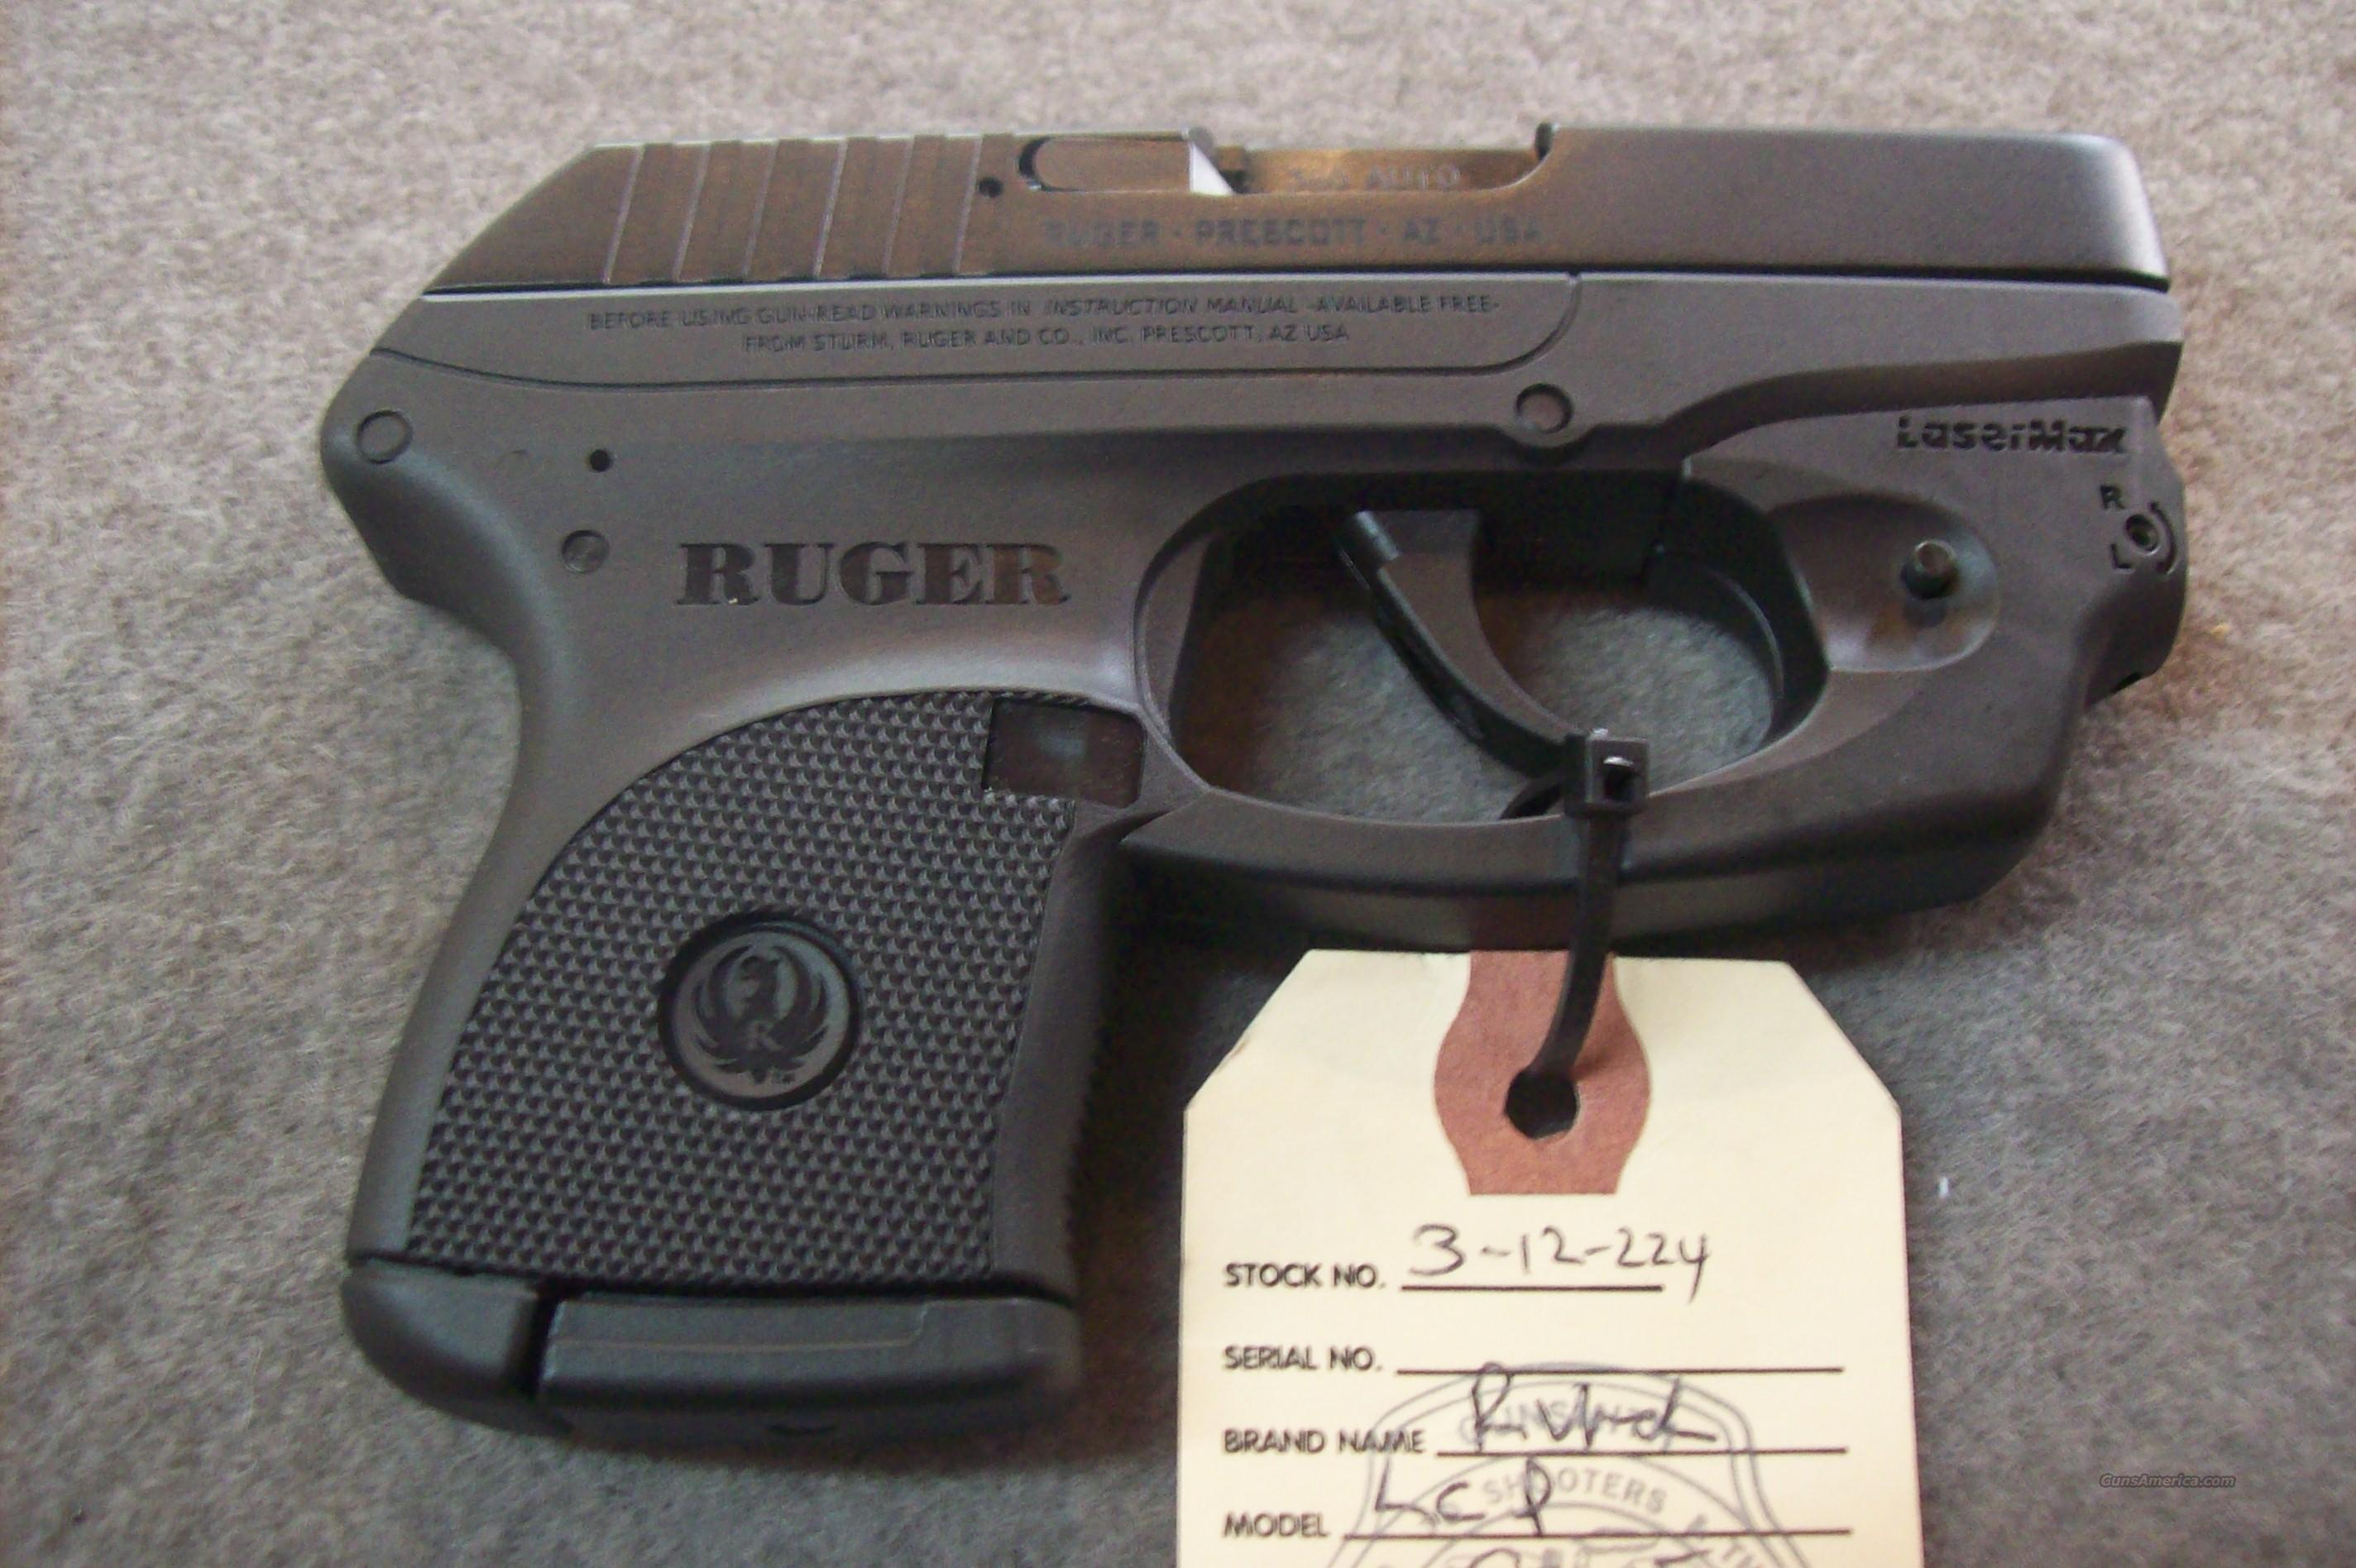 Ruger Lcp Standard Acp Pistol With Laser Bios Pics